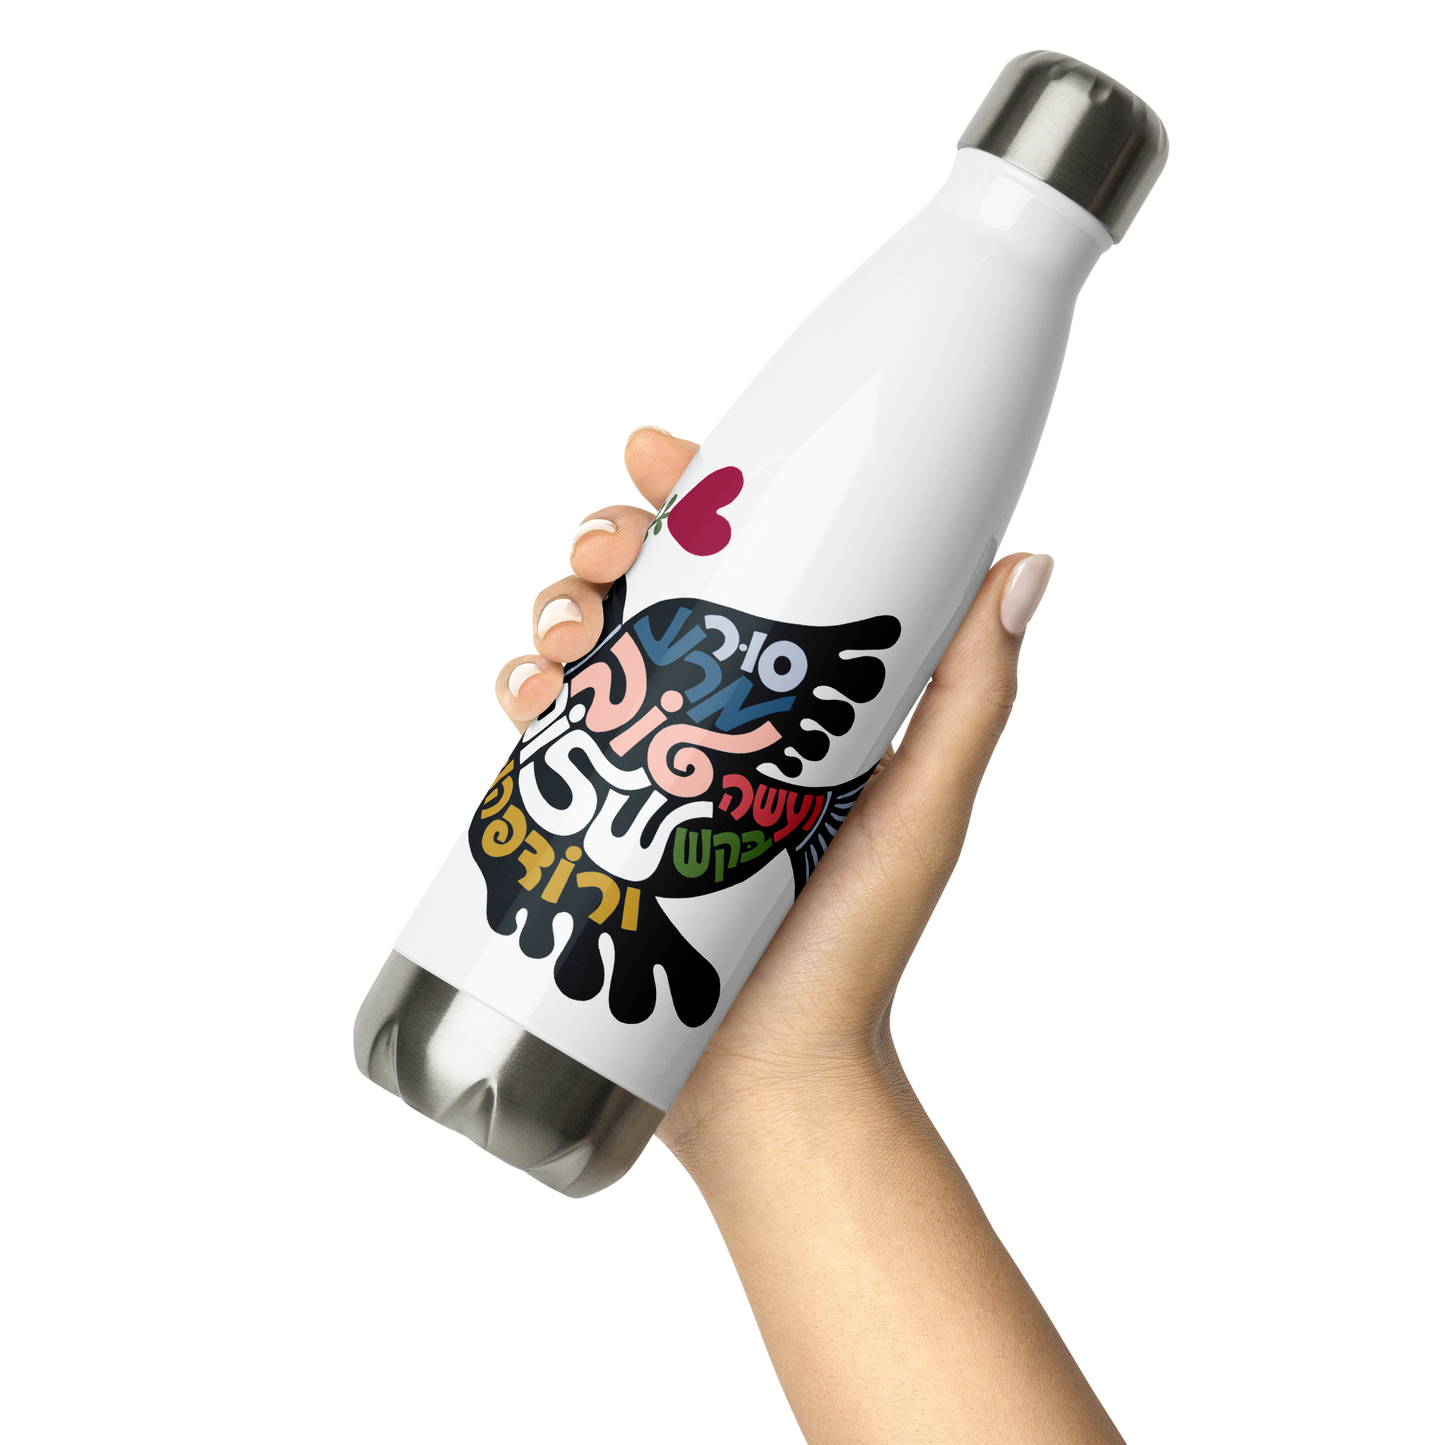 "Depart from evil, and do good; seek peace, and pursue it" Stainless Steel Water Bottle